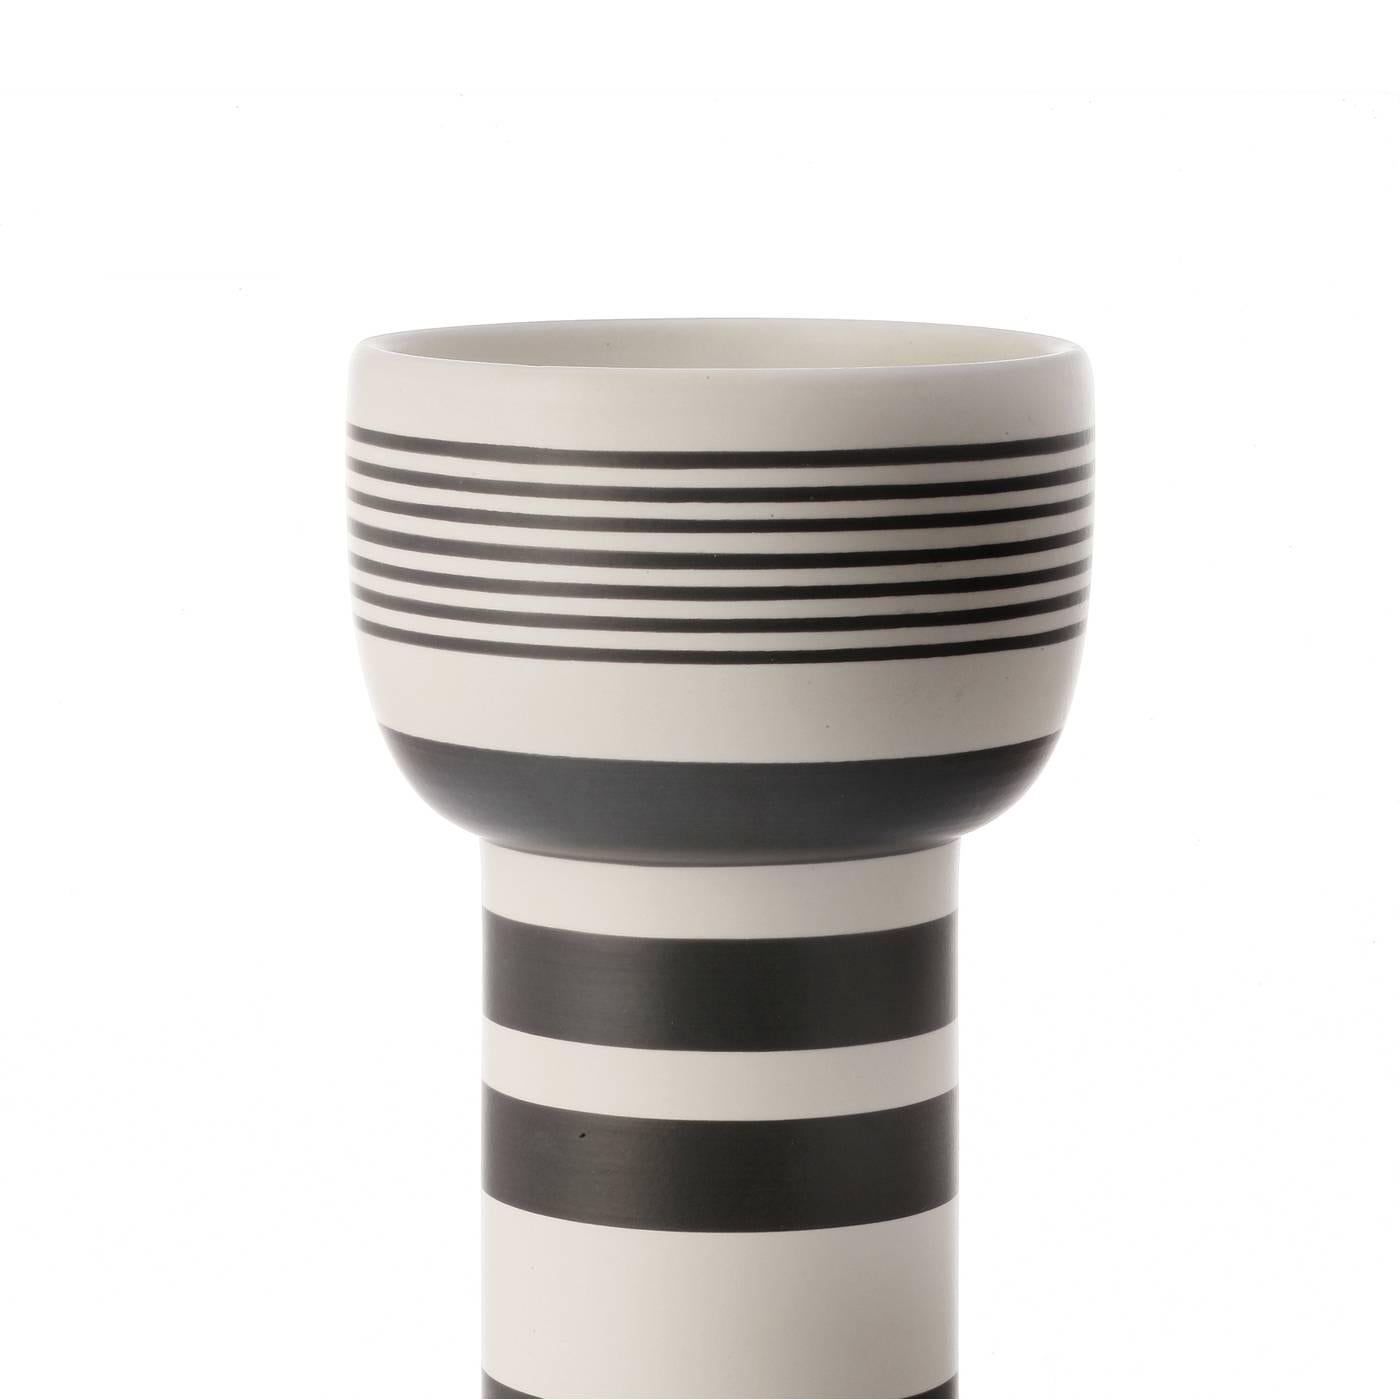 This elegant vase was designed by famous Italian architect Ettore Sottsass in 1962. It is in white clay and its geometric shape with a white finish is adorned with a series of parallel black lines of different thickness, for a striking final result.